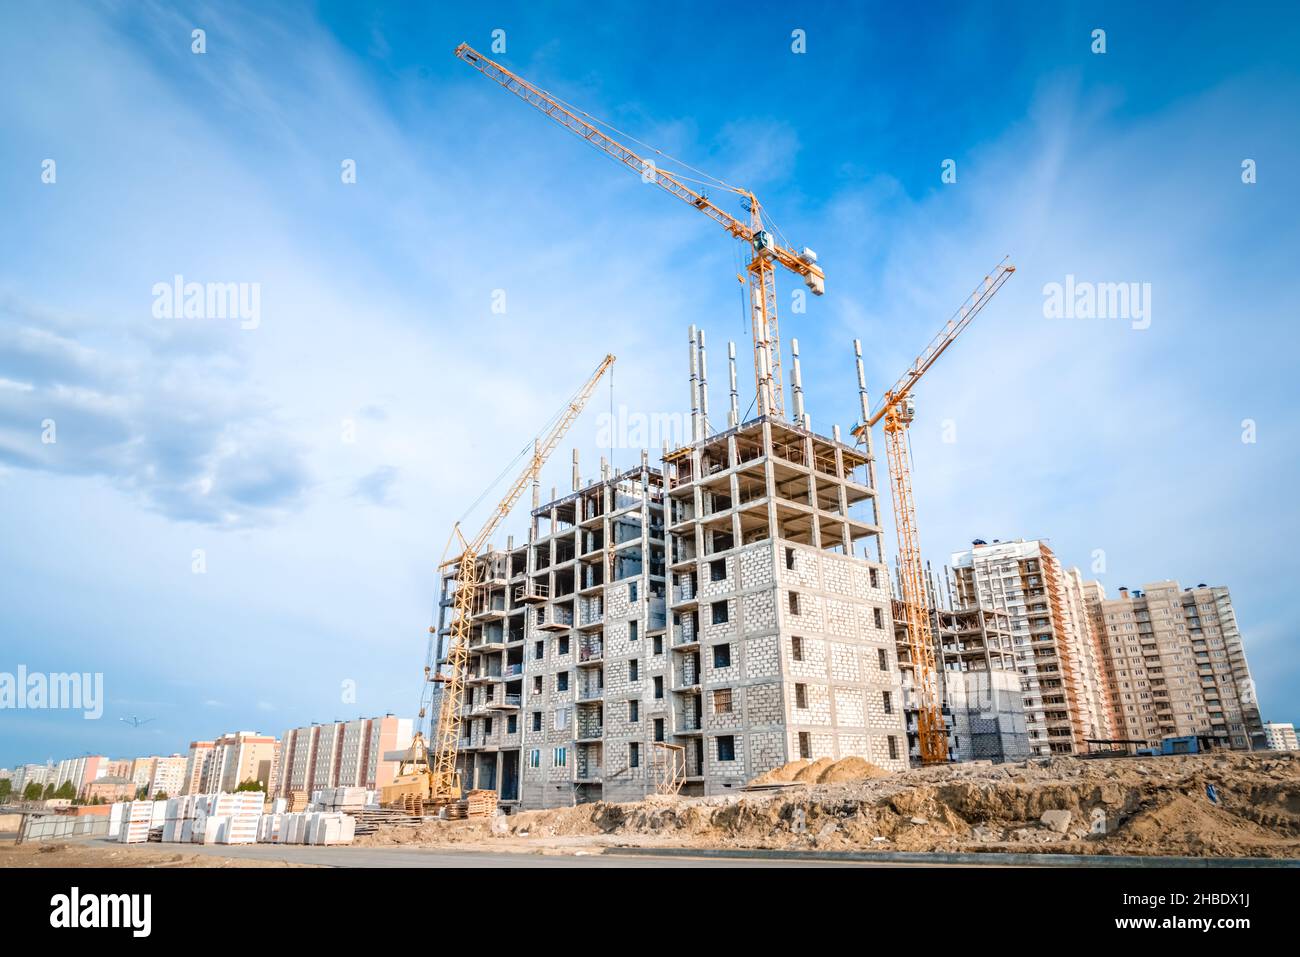 Construction of new apartments and crane Stock Photo